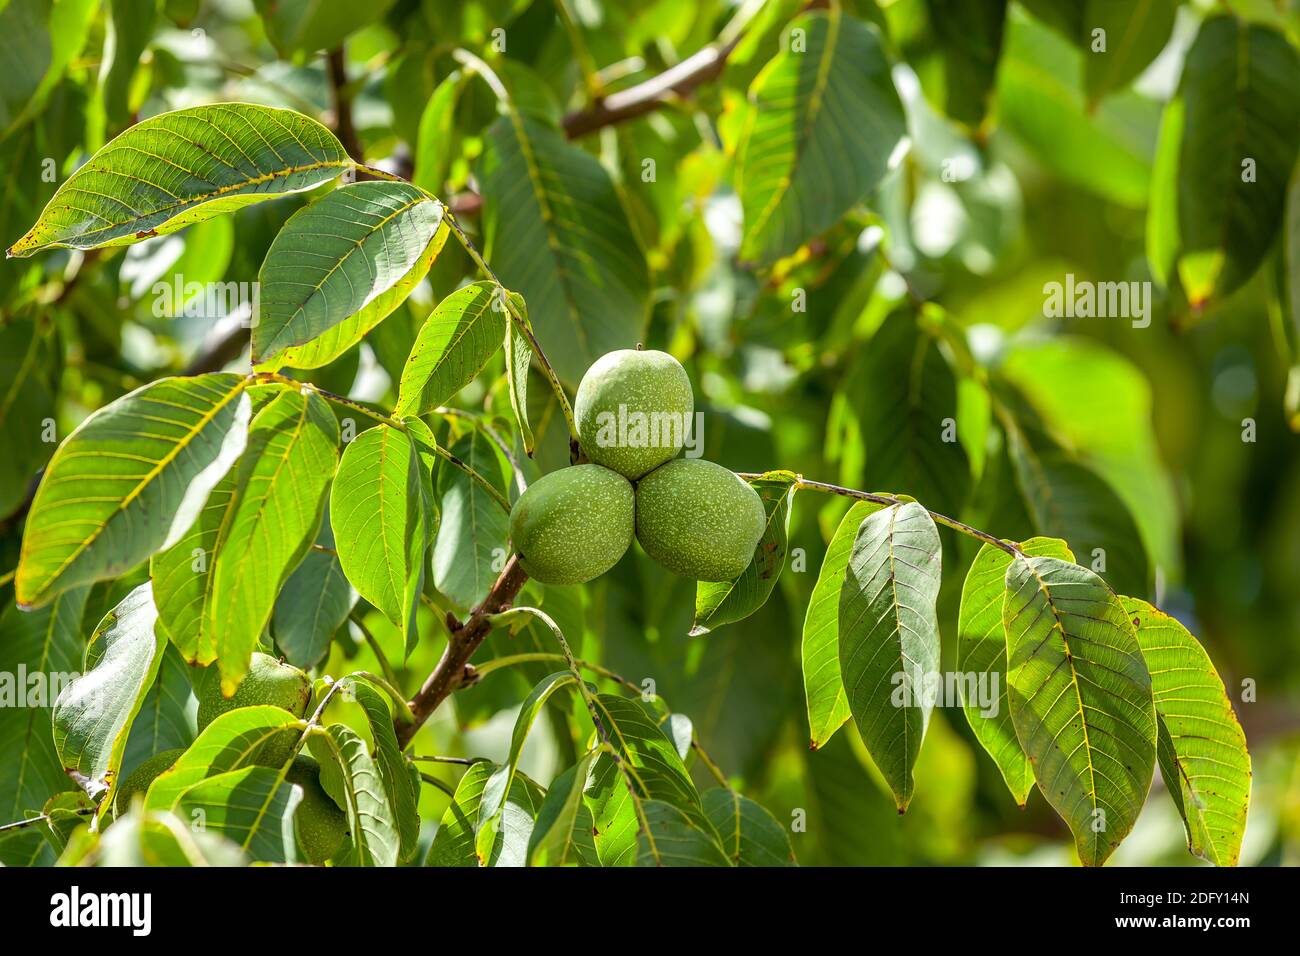 Green walnuts growing on a tree, close up Stock Photo